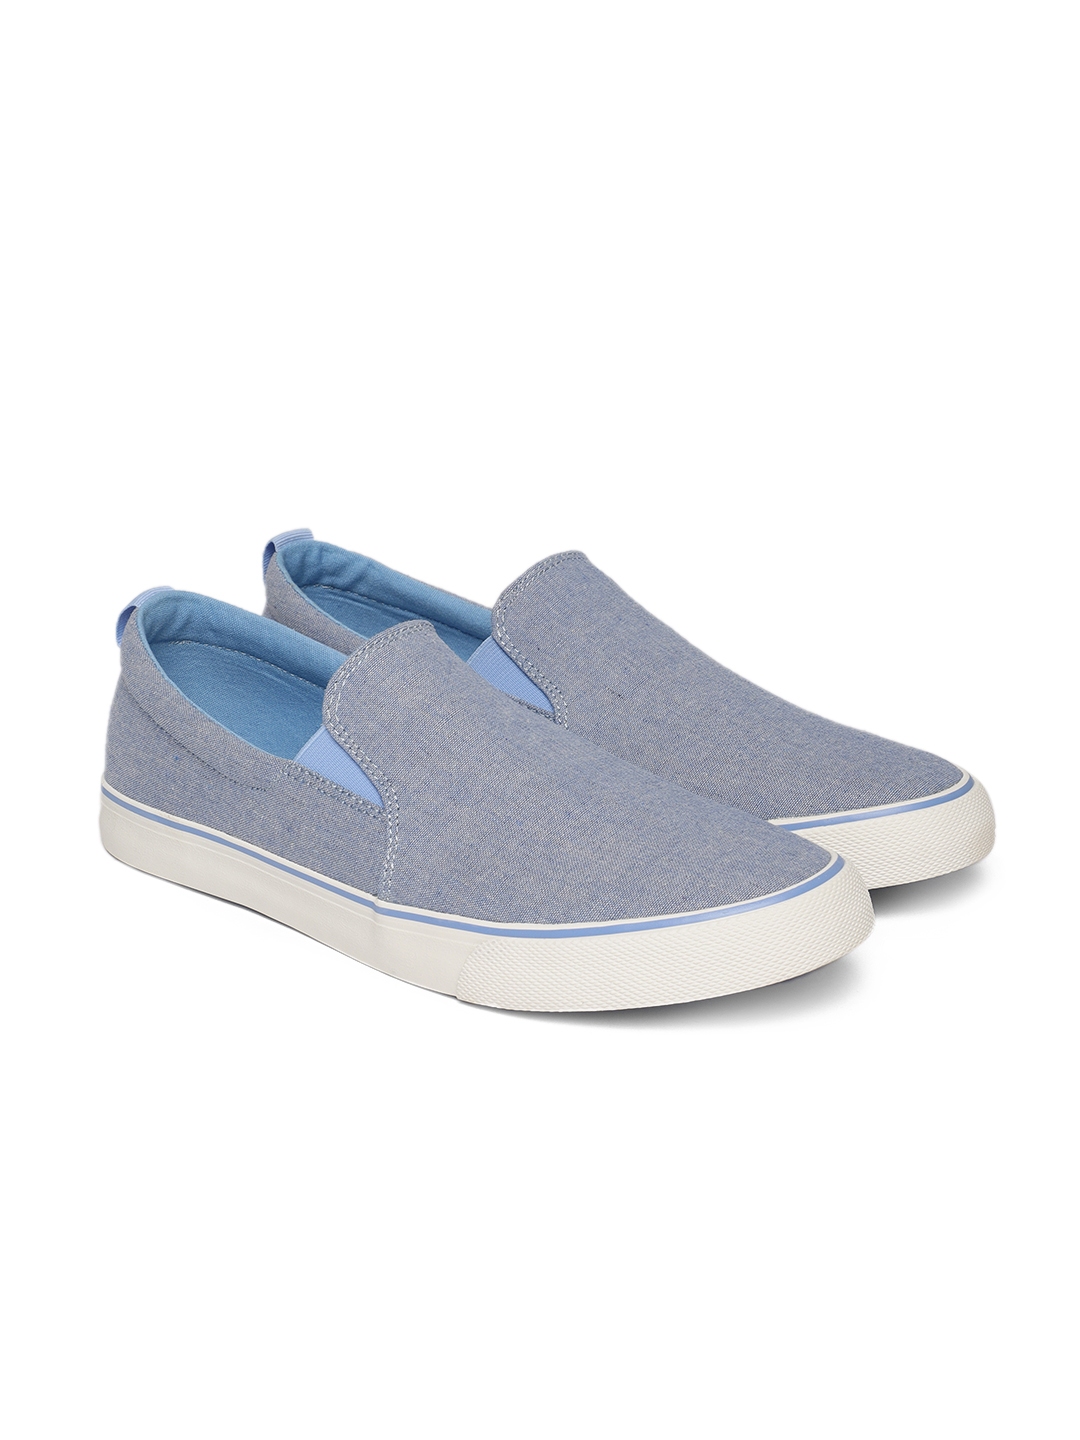 Buy United Colors Of Benetton Men Blue Slip On Sneakers - Casual Shoes ...